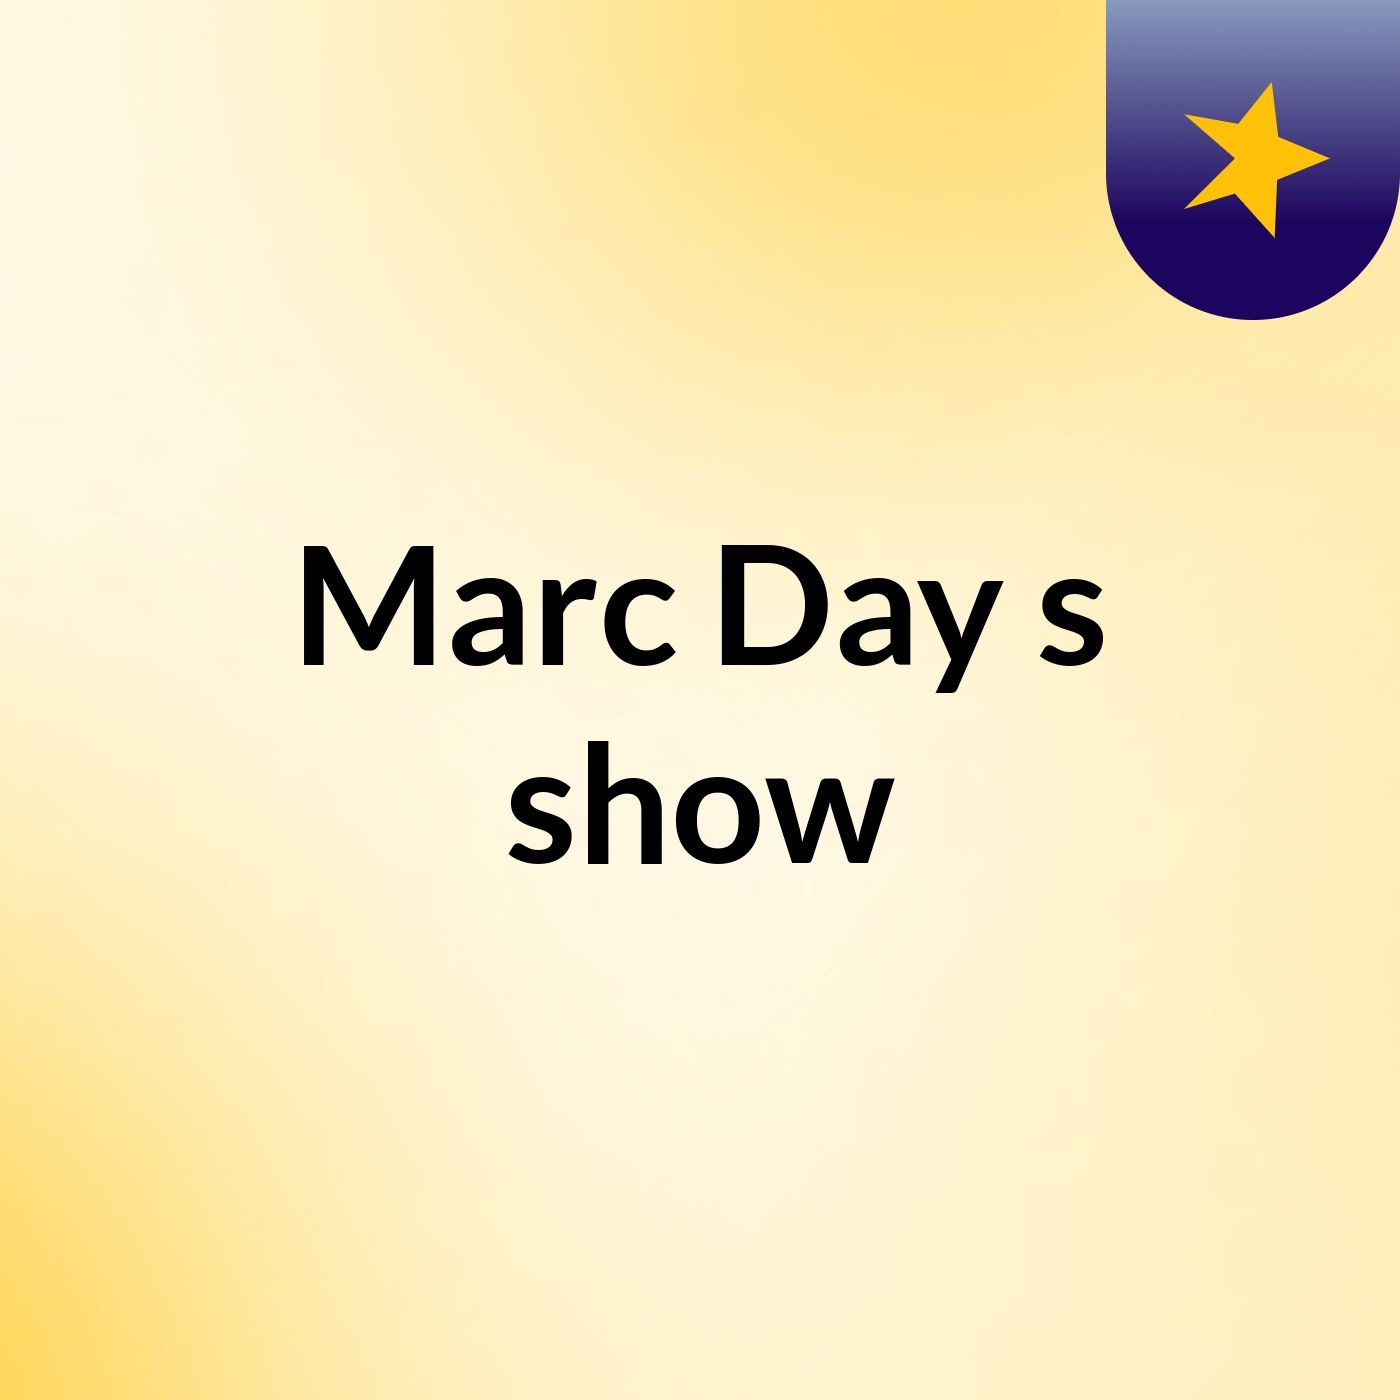 Marc Day's show